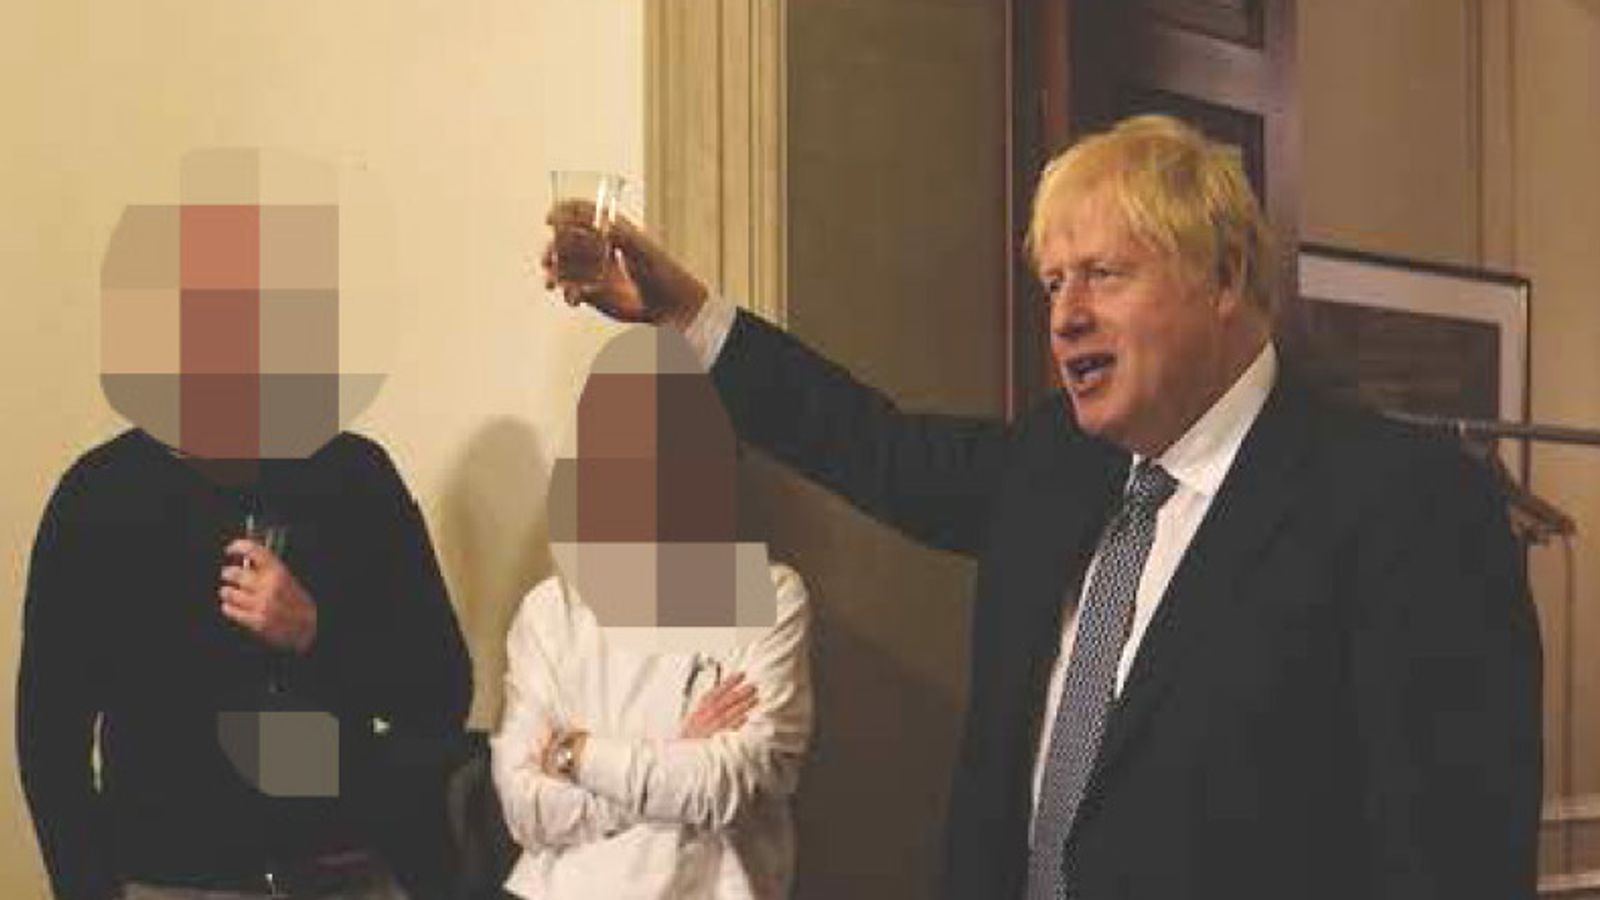 COVID rule breaches at Downing St parties would have been 'obvious' to Johnson - MP committee